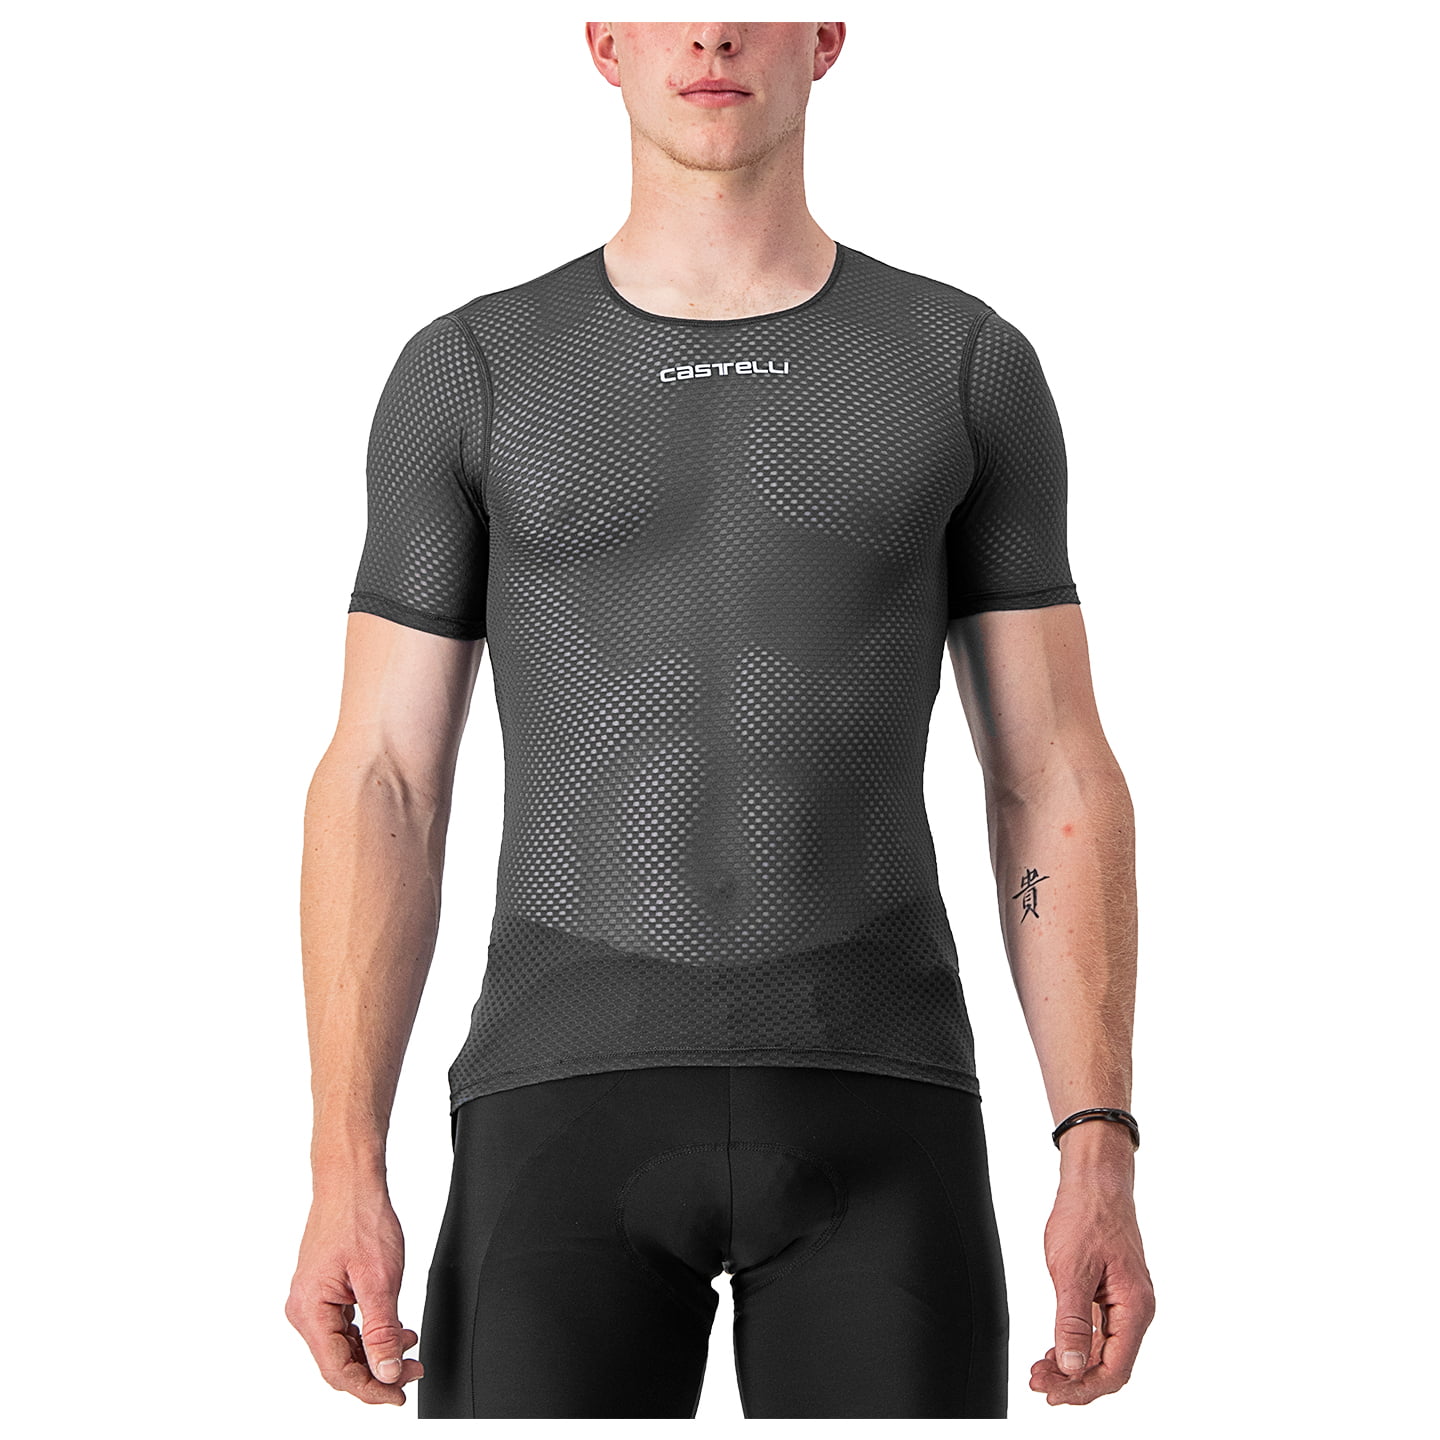 CASTELLI Pro Mesh 2.0 Cycling Base Layer Base Layer, for men, size L, Singlet, Cycle clothing